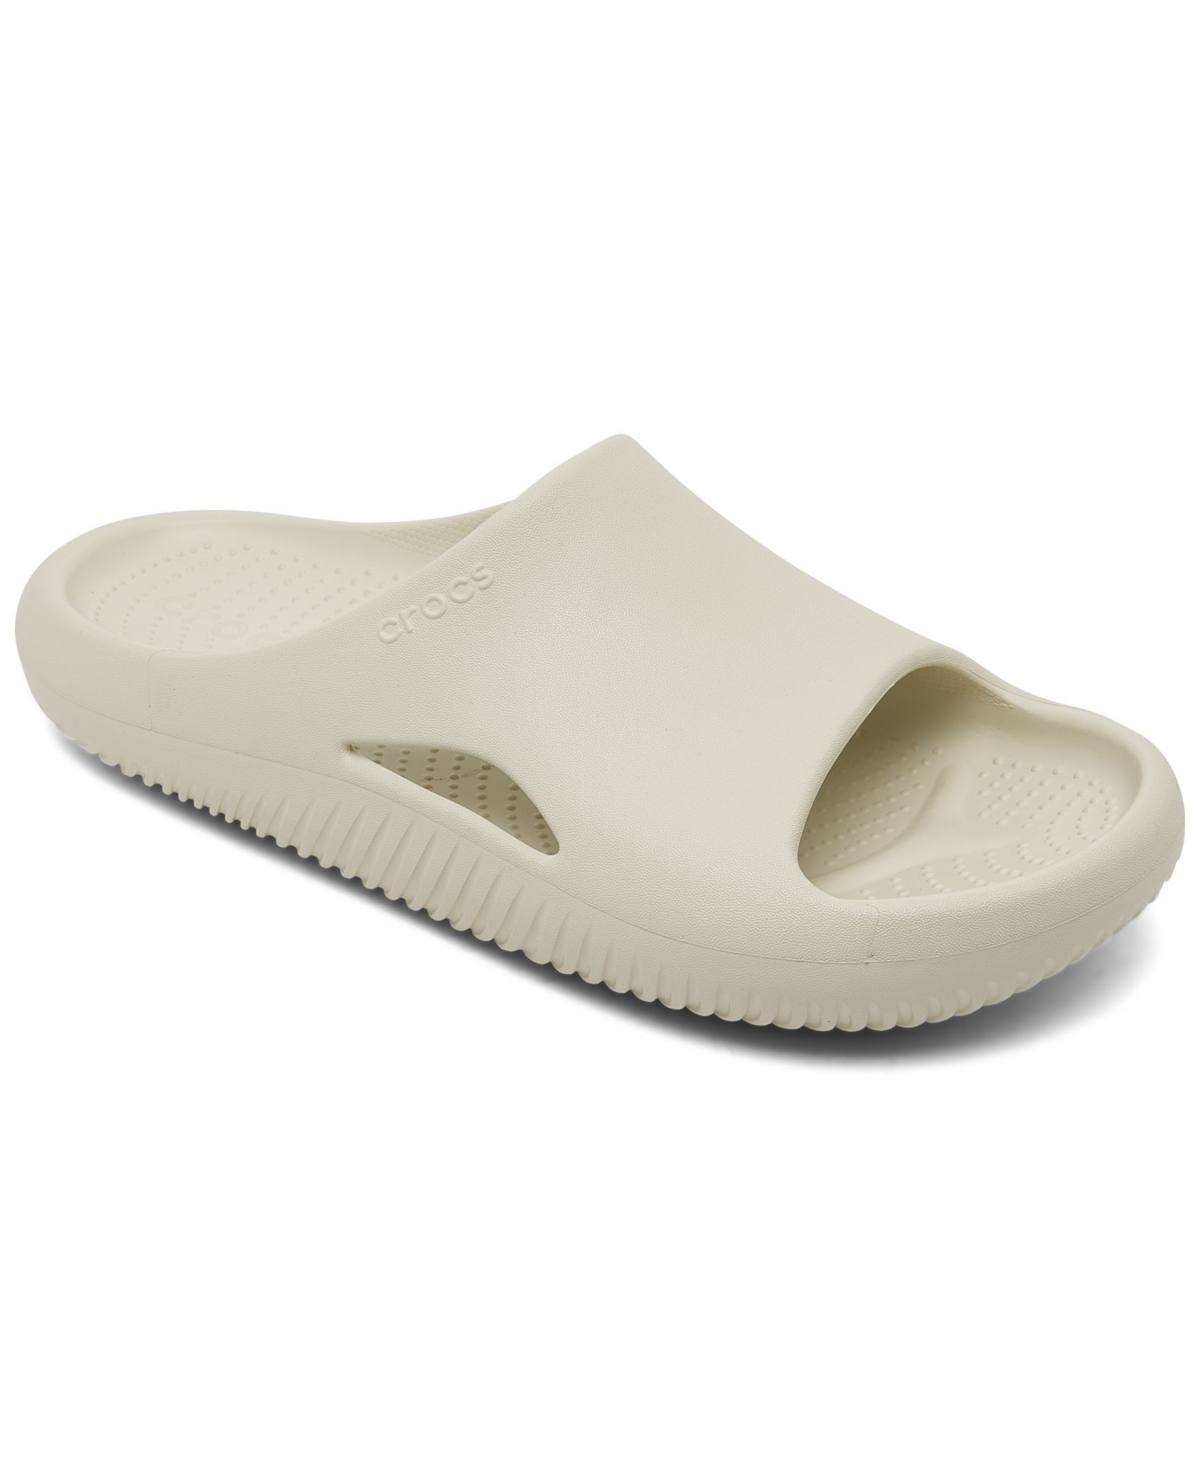 Men's Mellow Recovery Slide Sandals from Finish Line - Bone